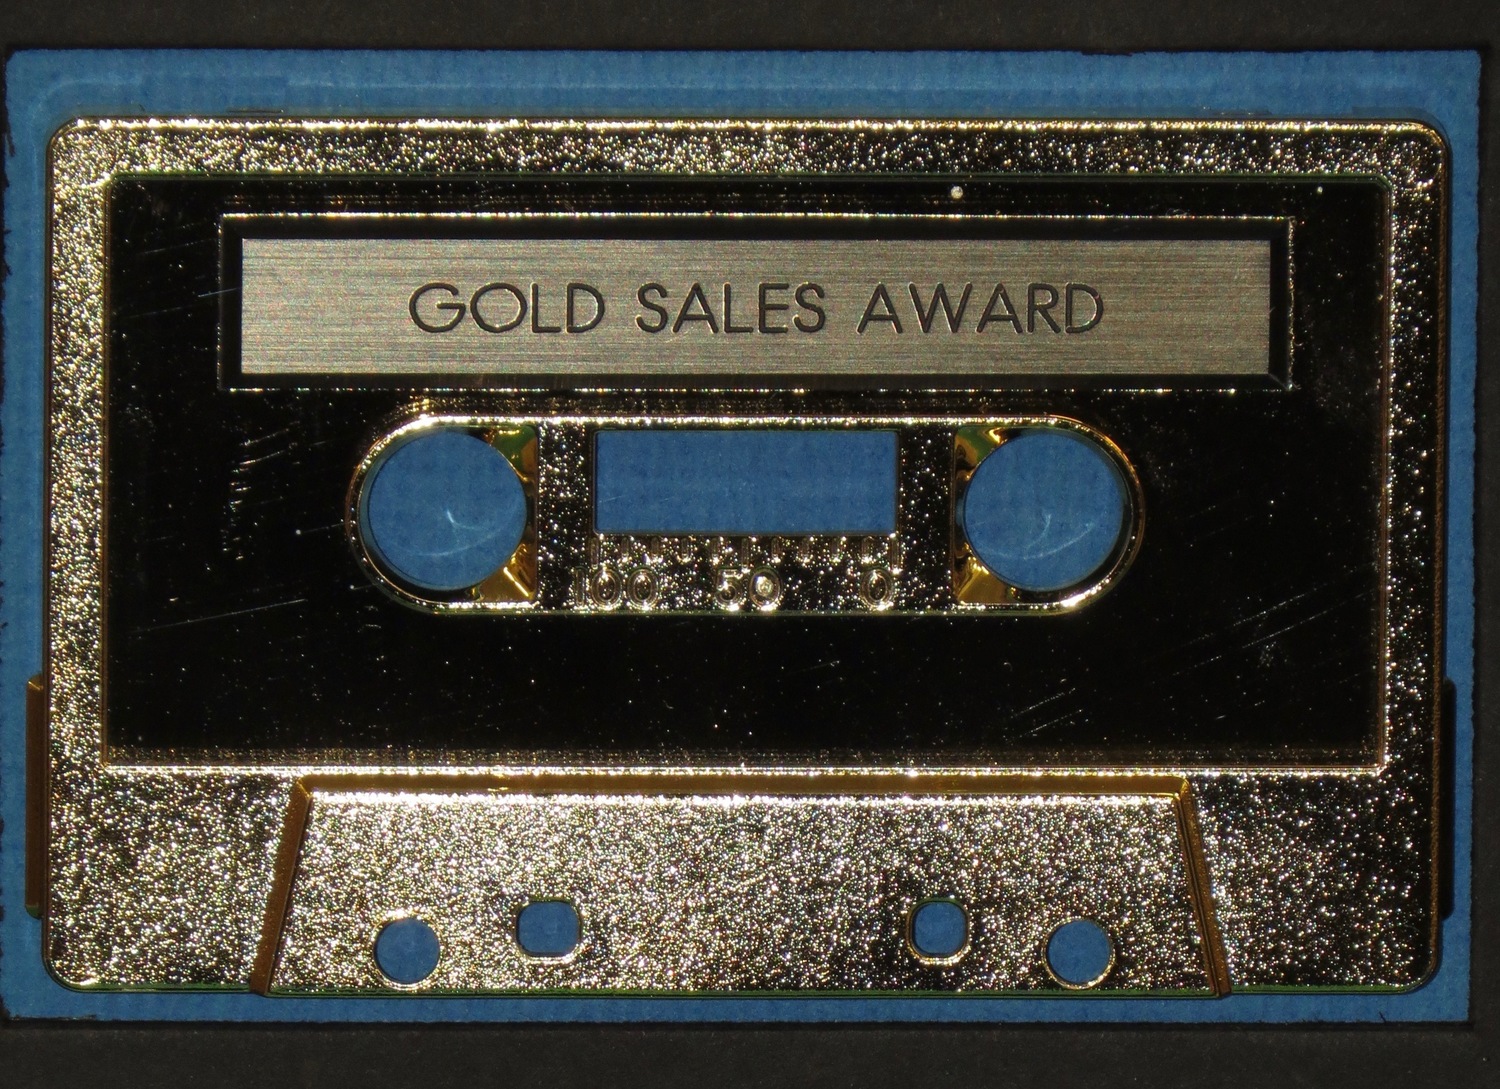 Debut RIAA Gold Award Presented to Foo Fighters